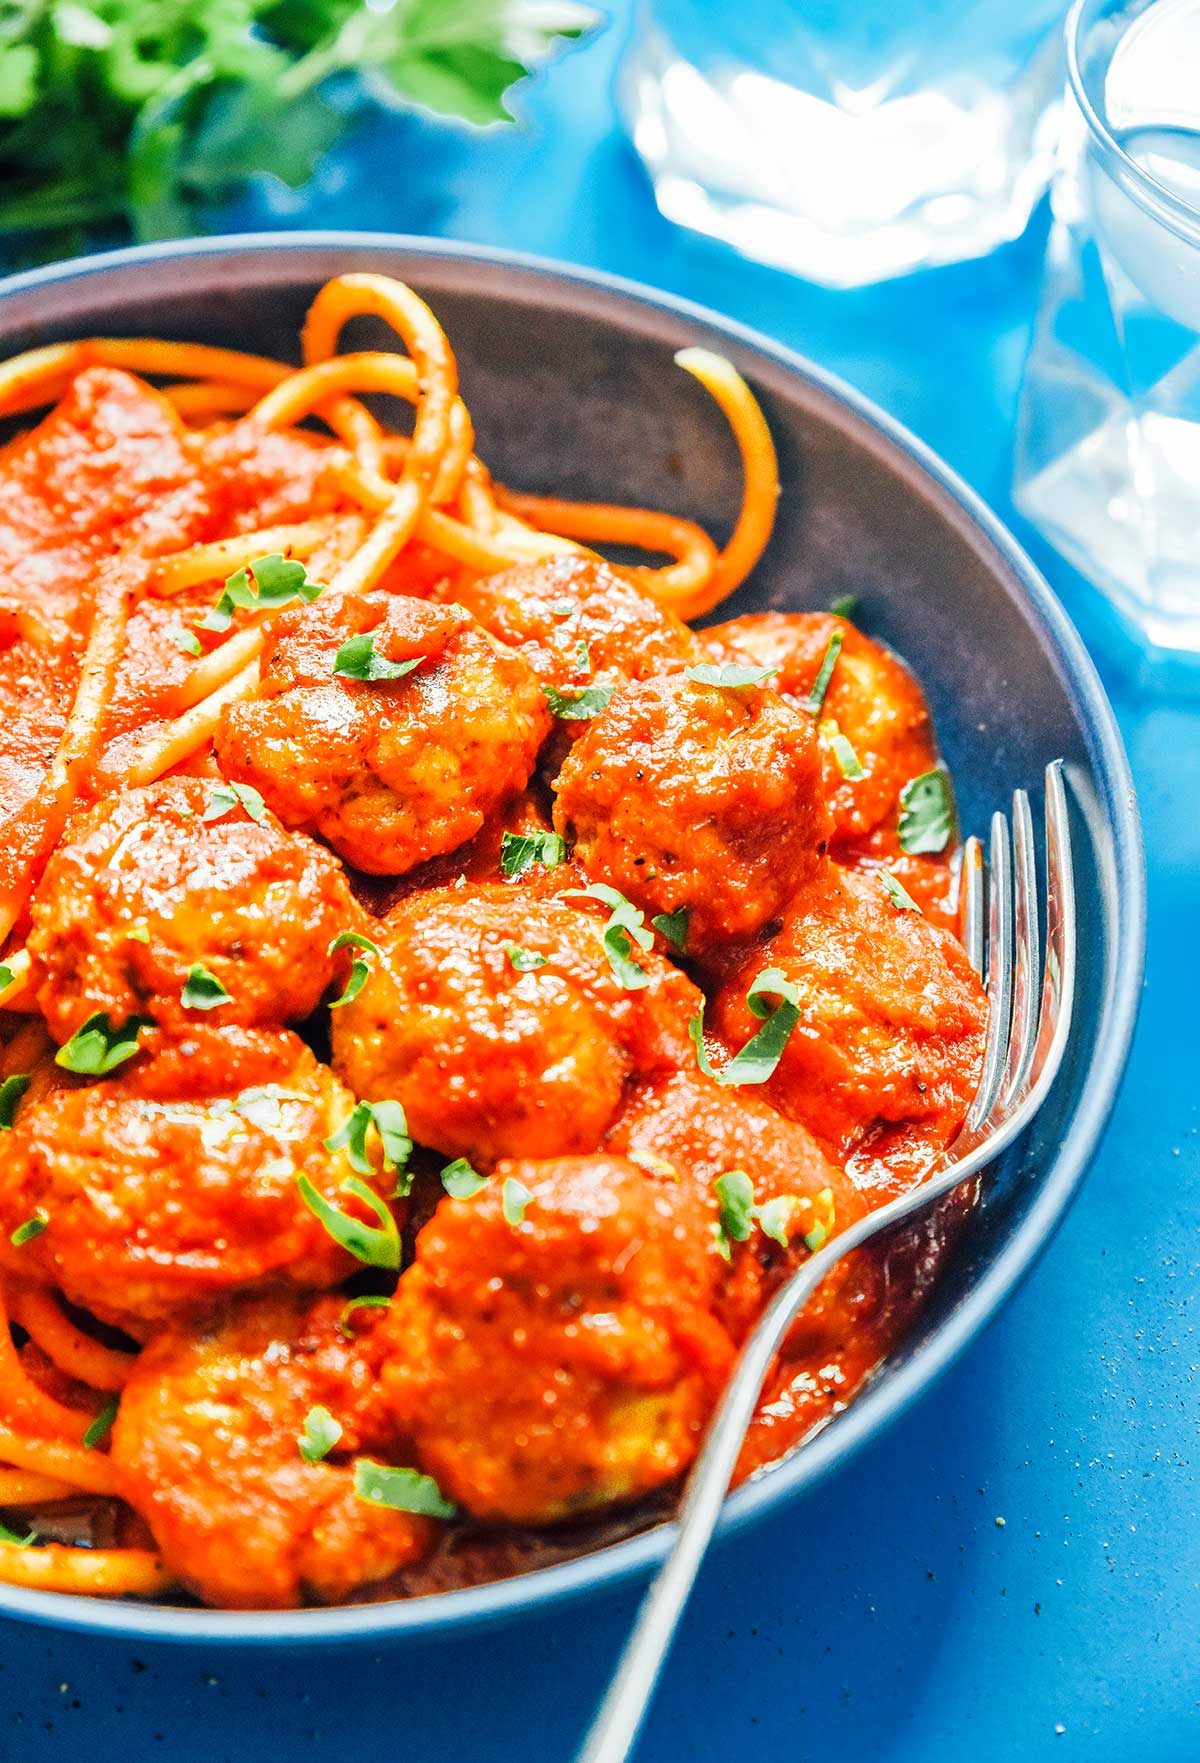 A blue ceramic bowl filled with pasta, marinara sauce, and seitan plant-based meatballs